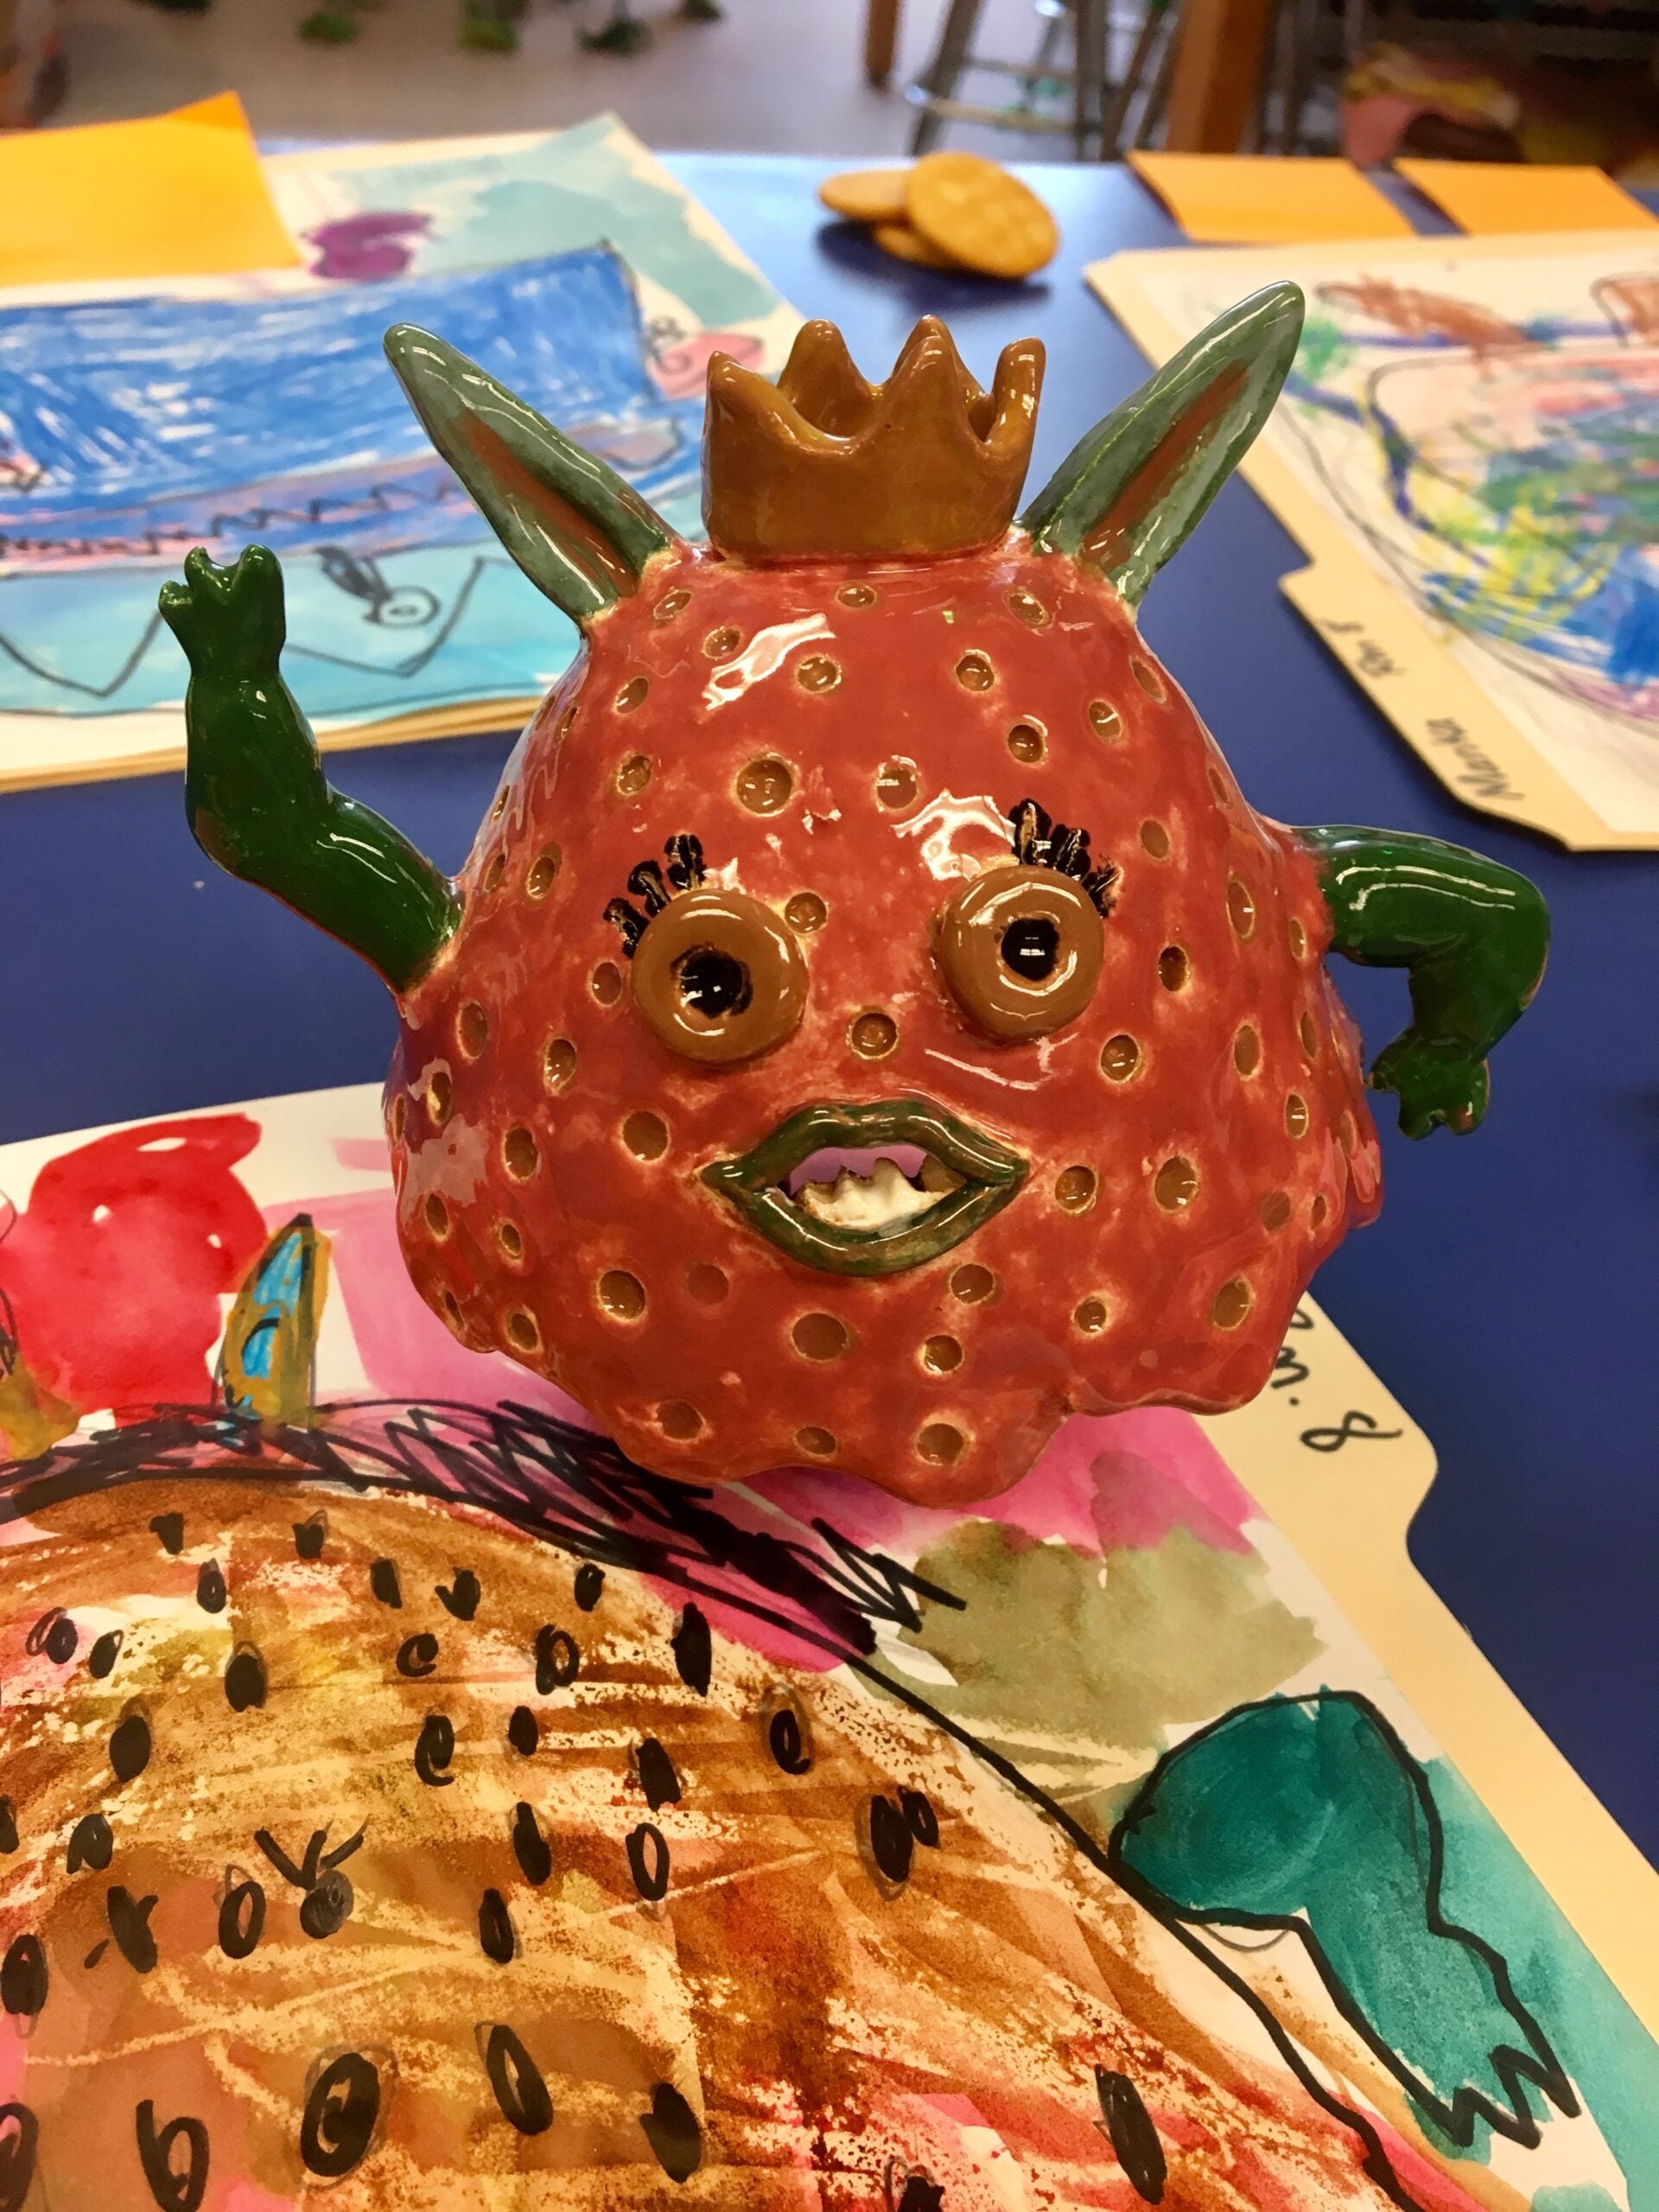 Student artwork of clay sculpture of strawberry character.